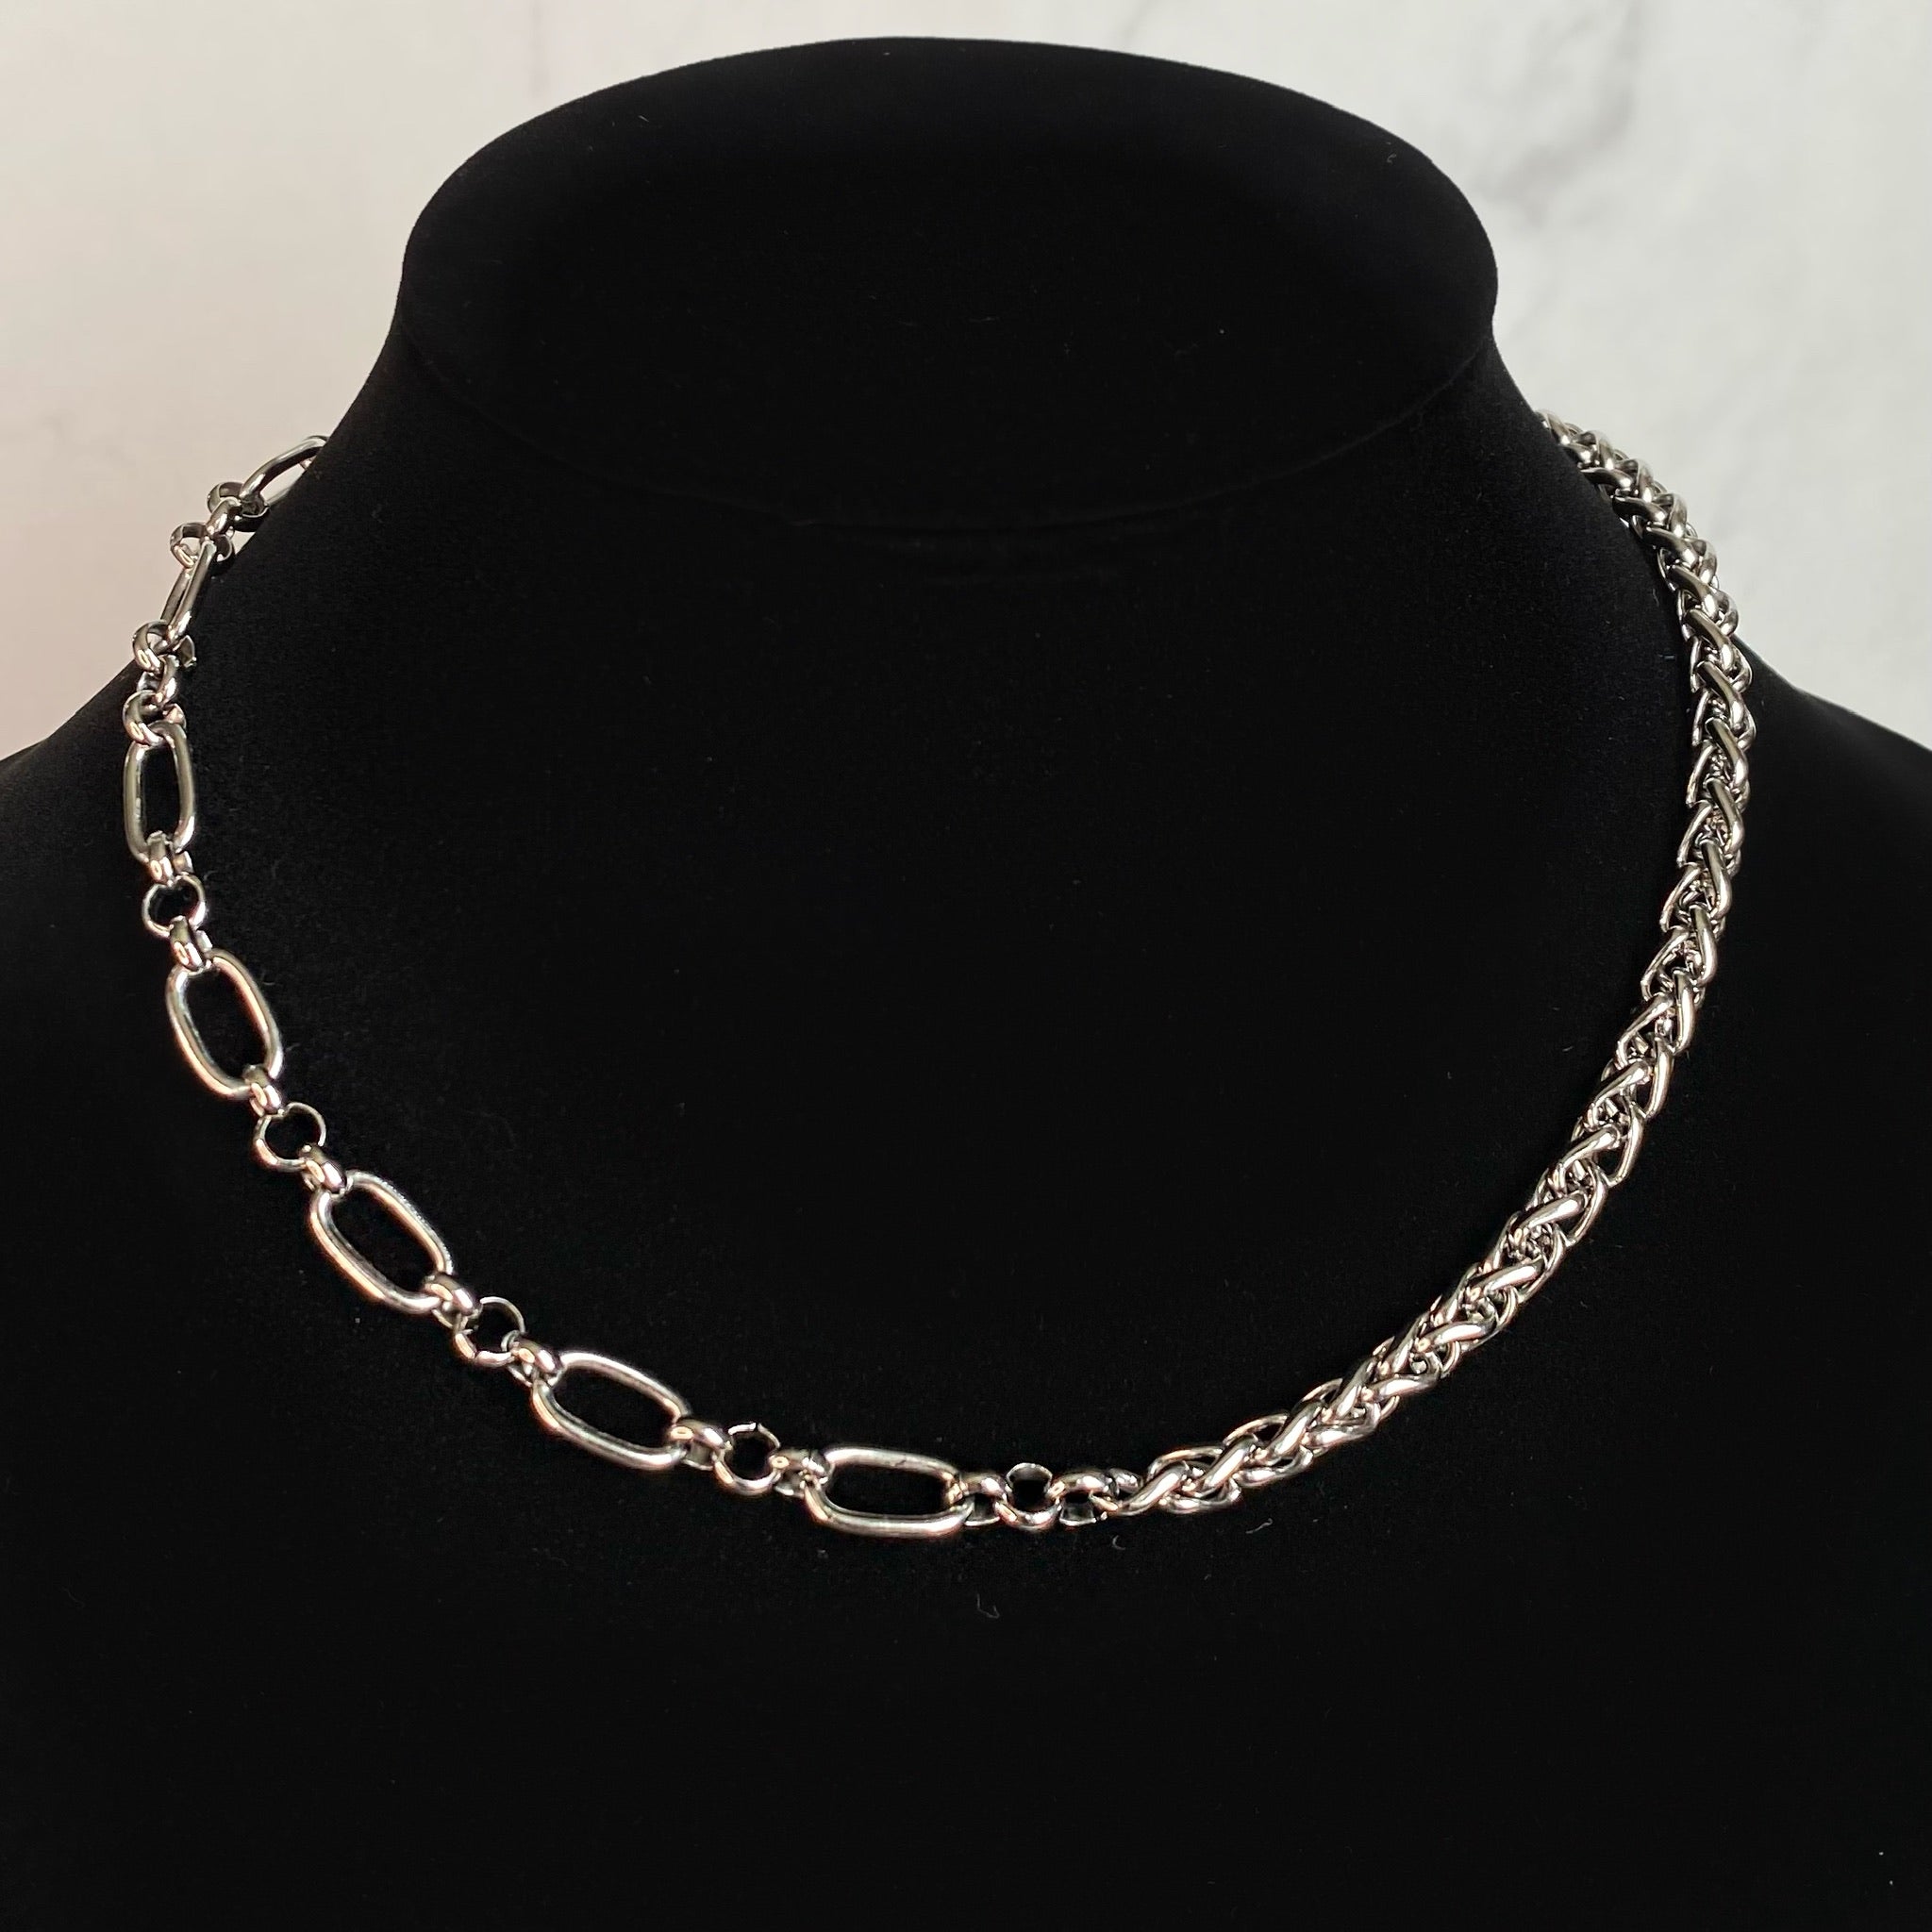 Macie Chain Necklace - Silver